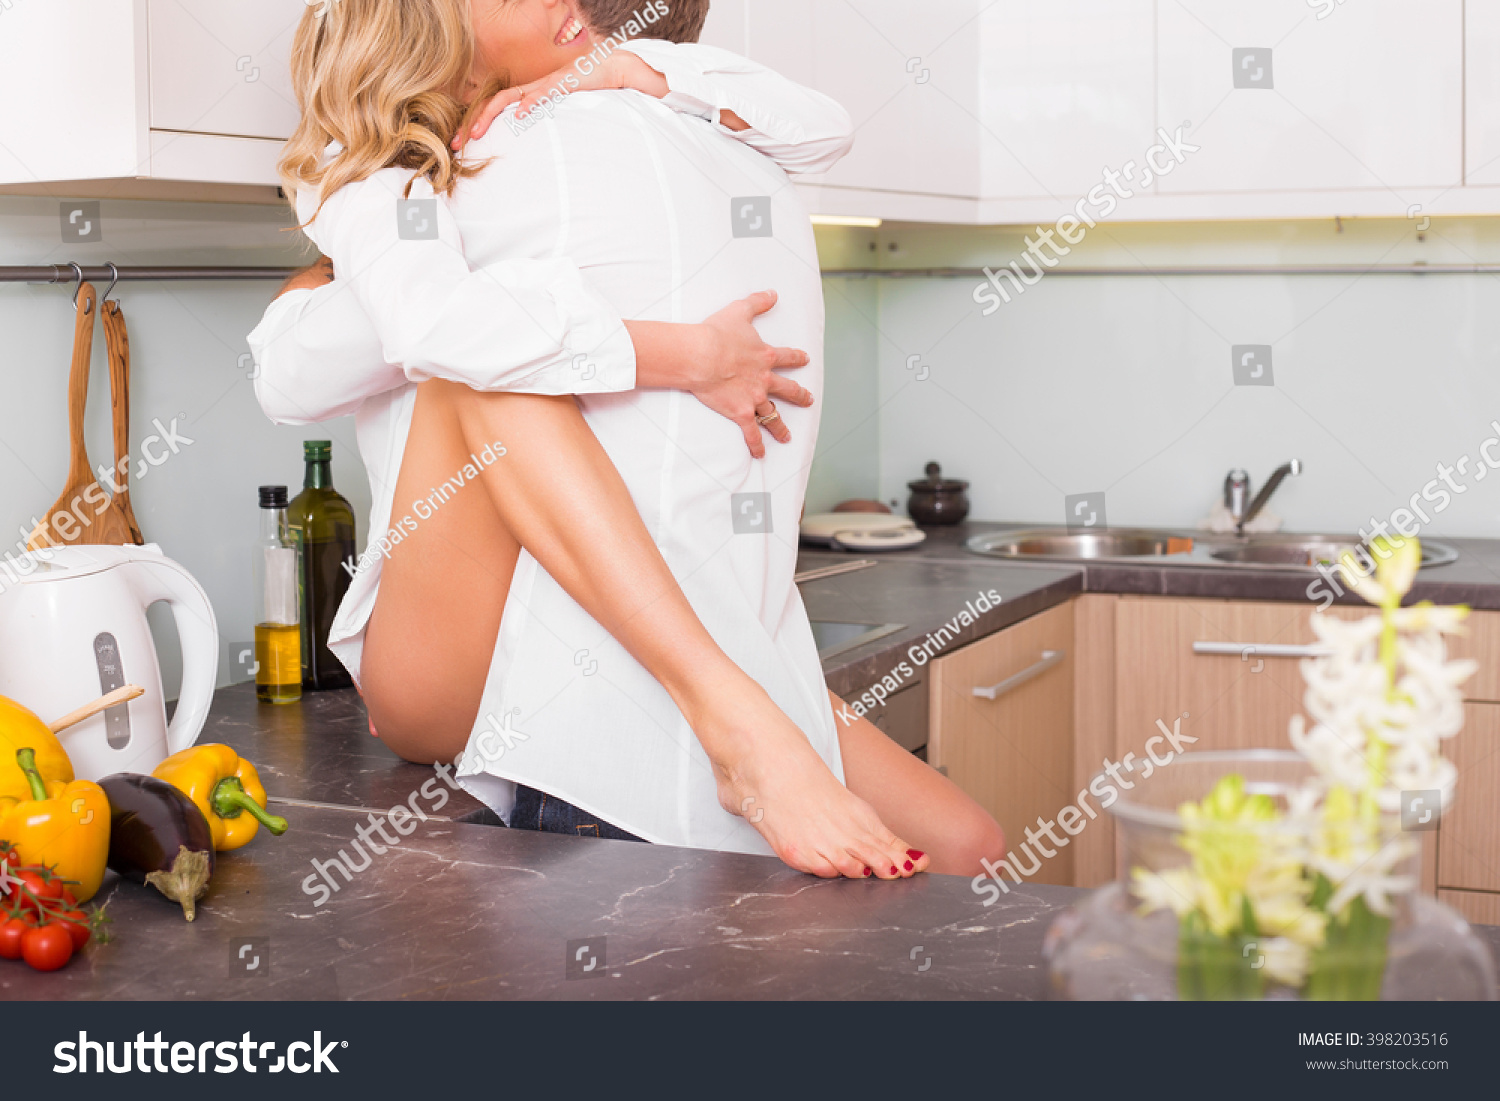 Sex On Counter 42